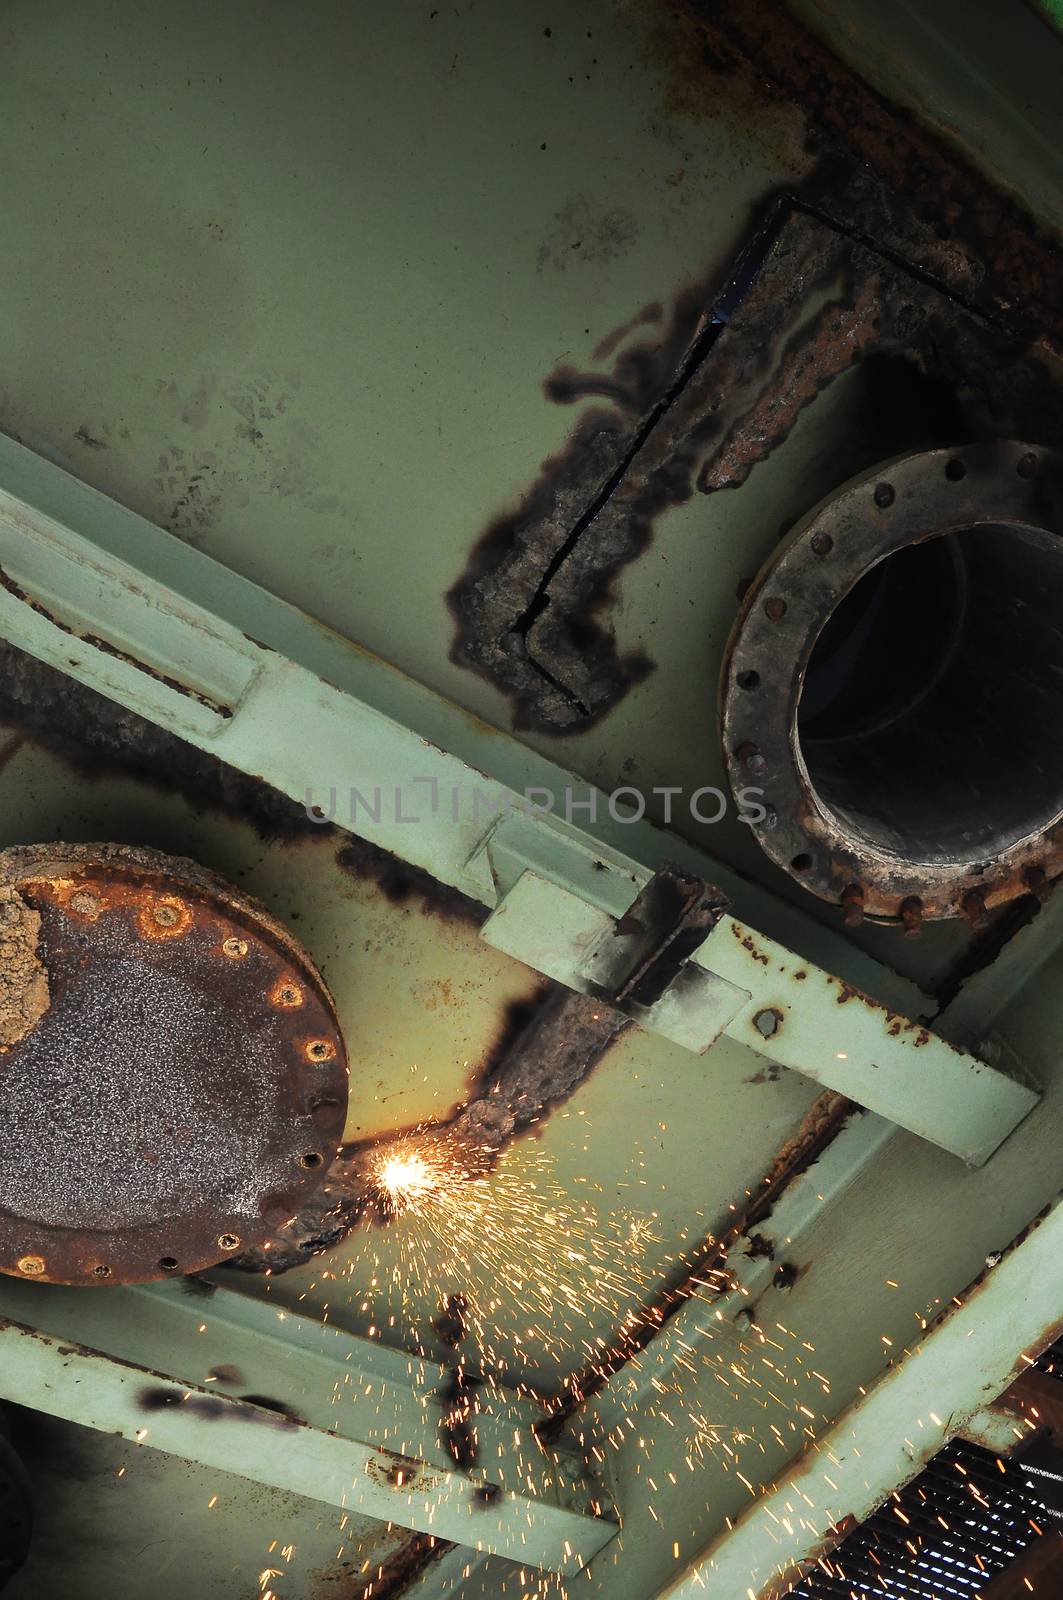 A small glowing flame underneath a steel structure in the process of being cut up and demolished by an acetylene torch, out of sight.